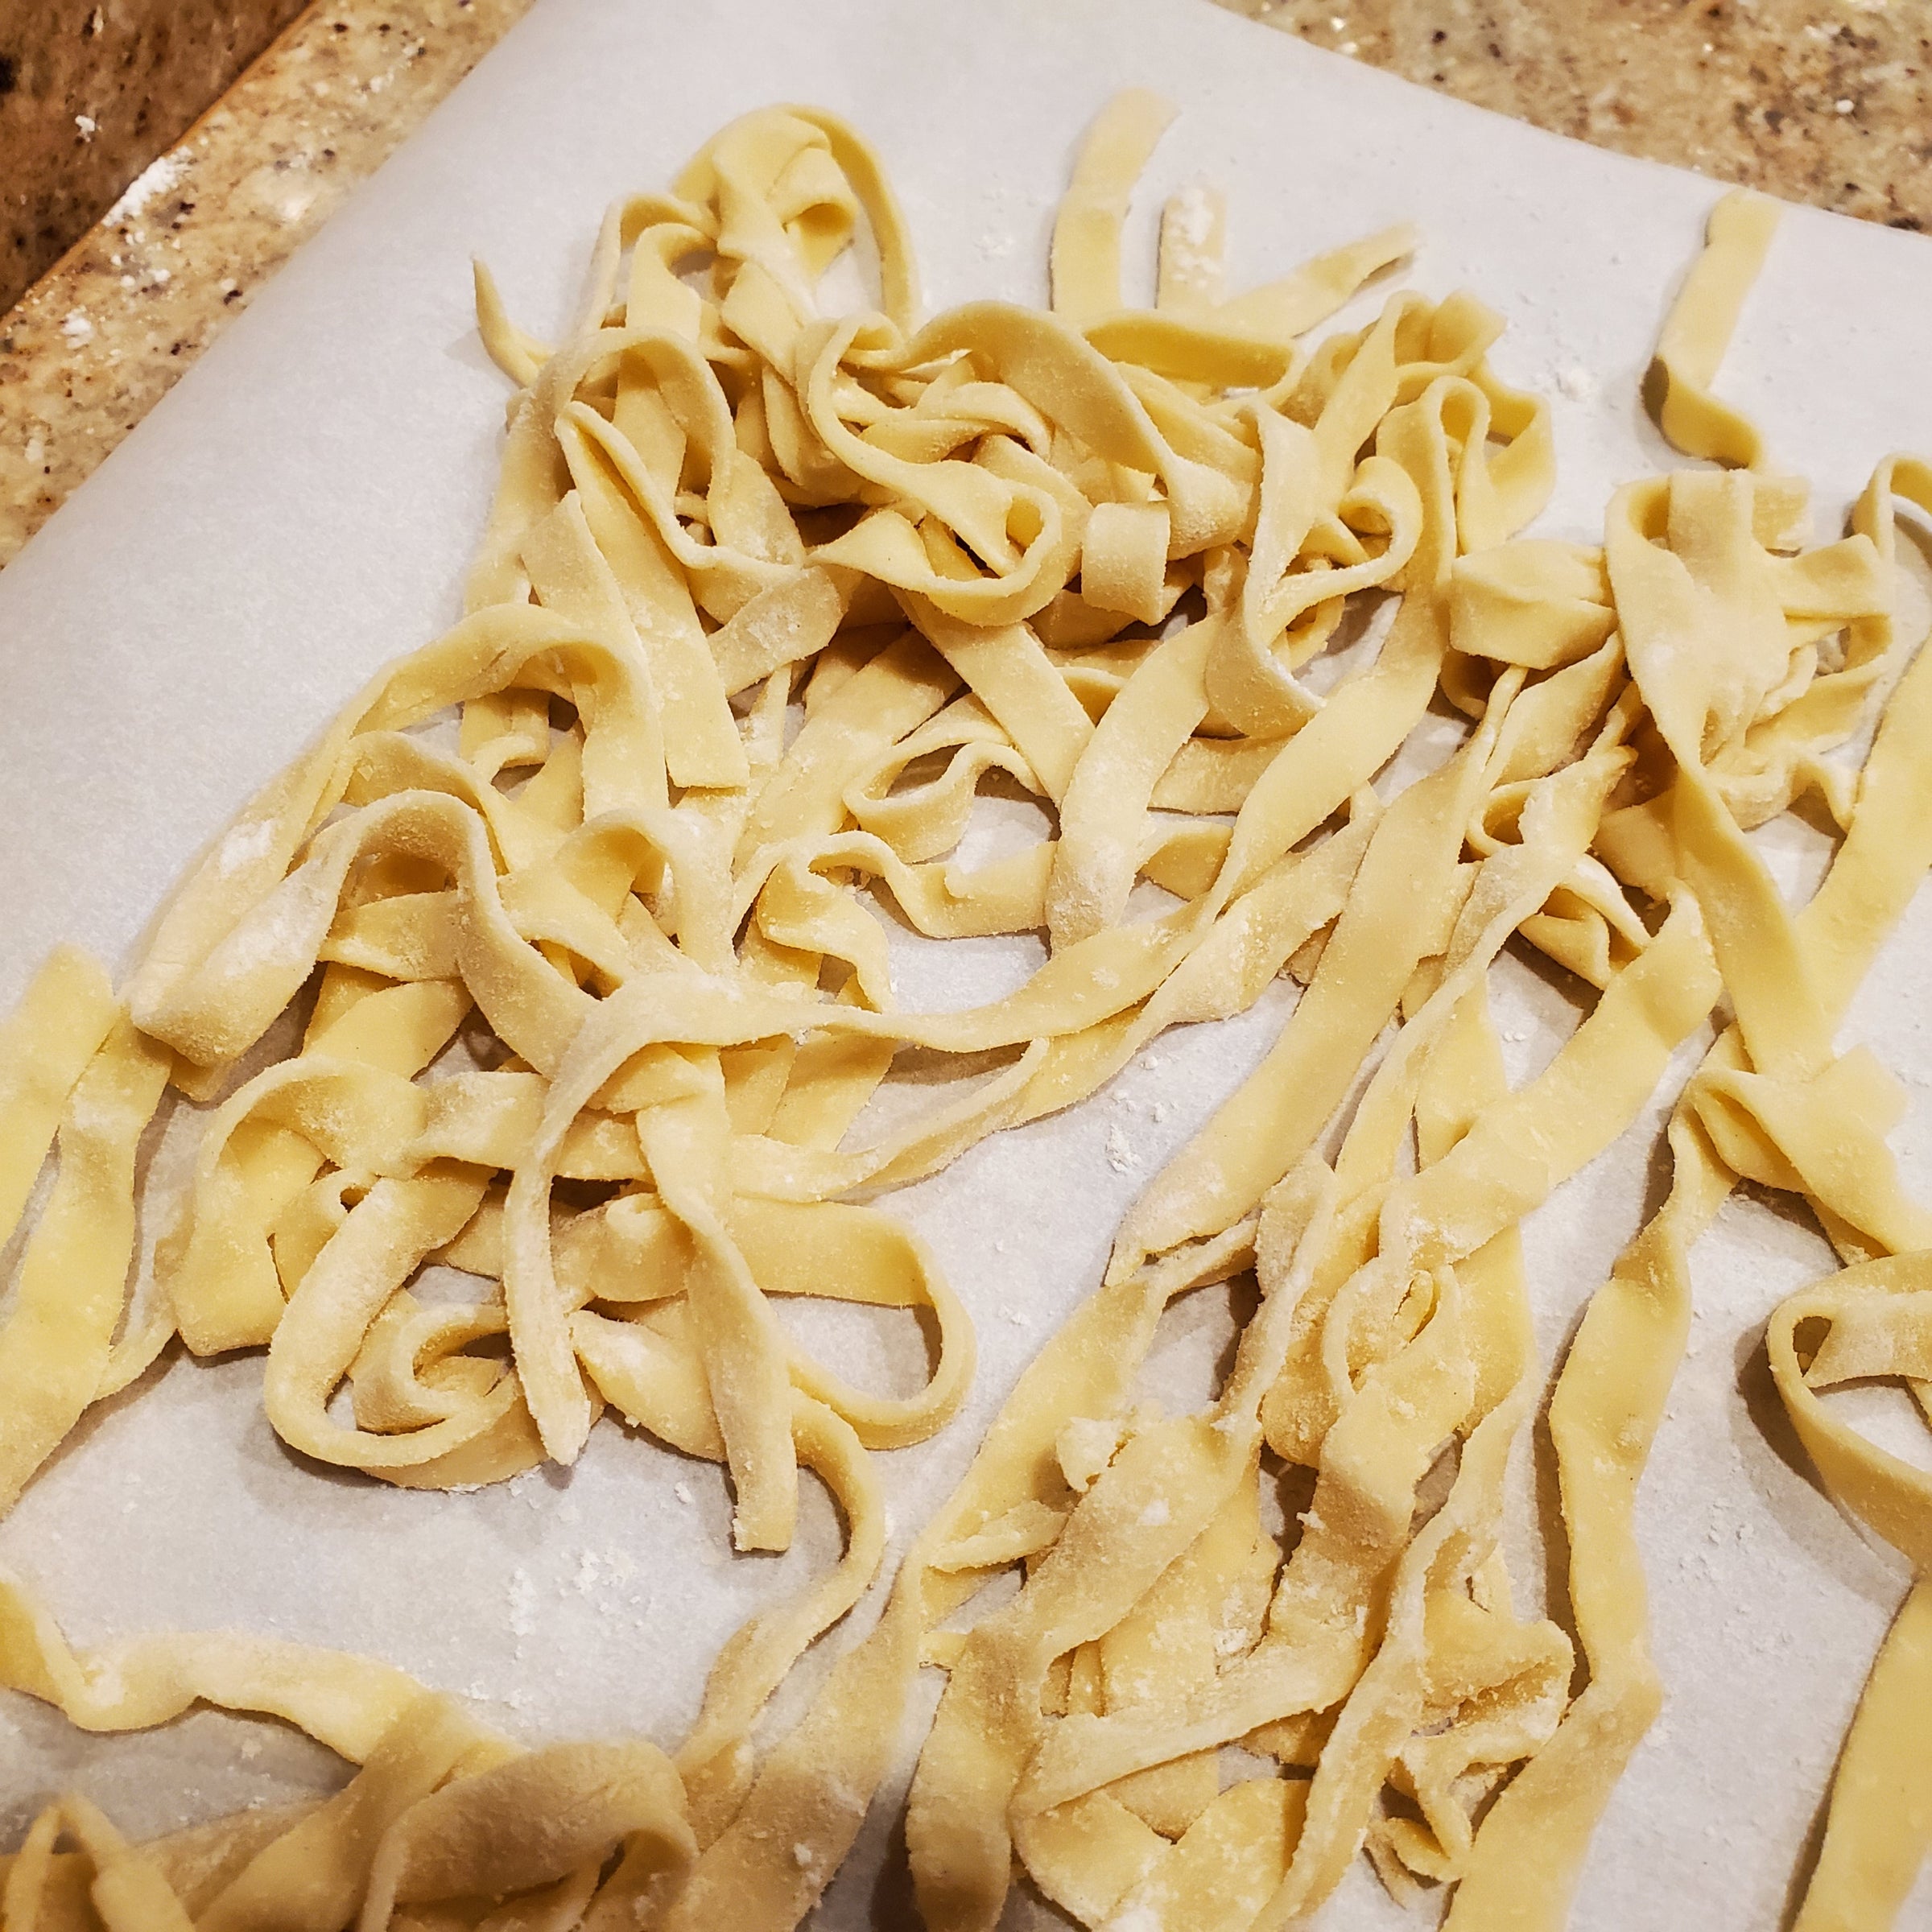 How to Make Pasta at Home